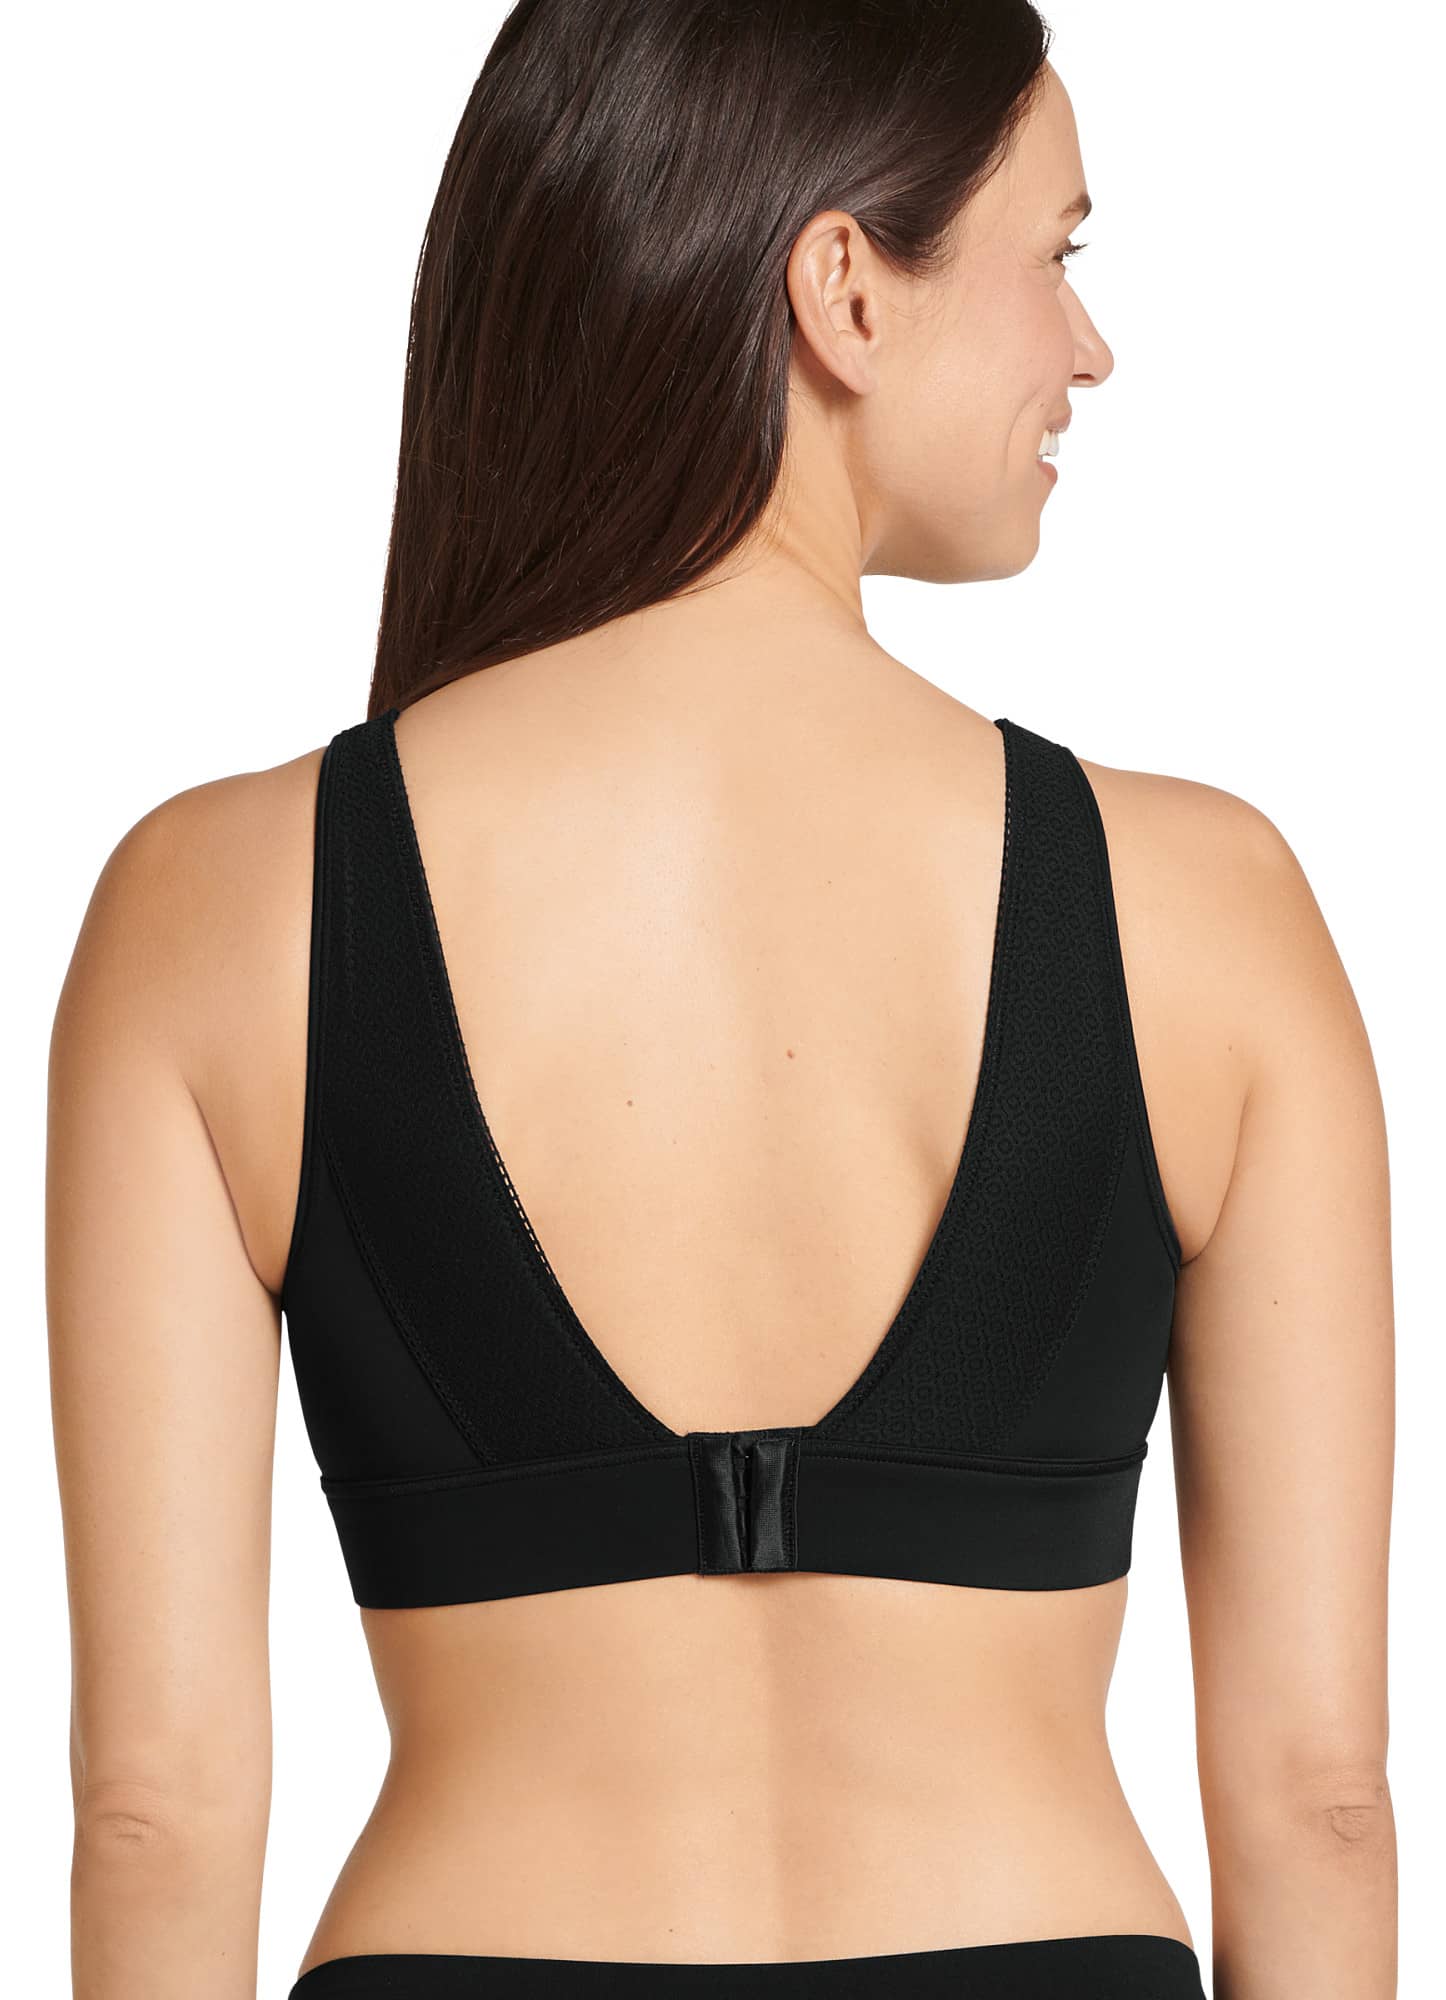 Jockey Women's Forever Fit Full Coverage Lightly Lined Lace Bra